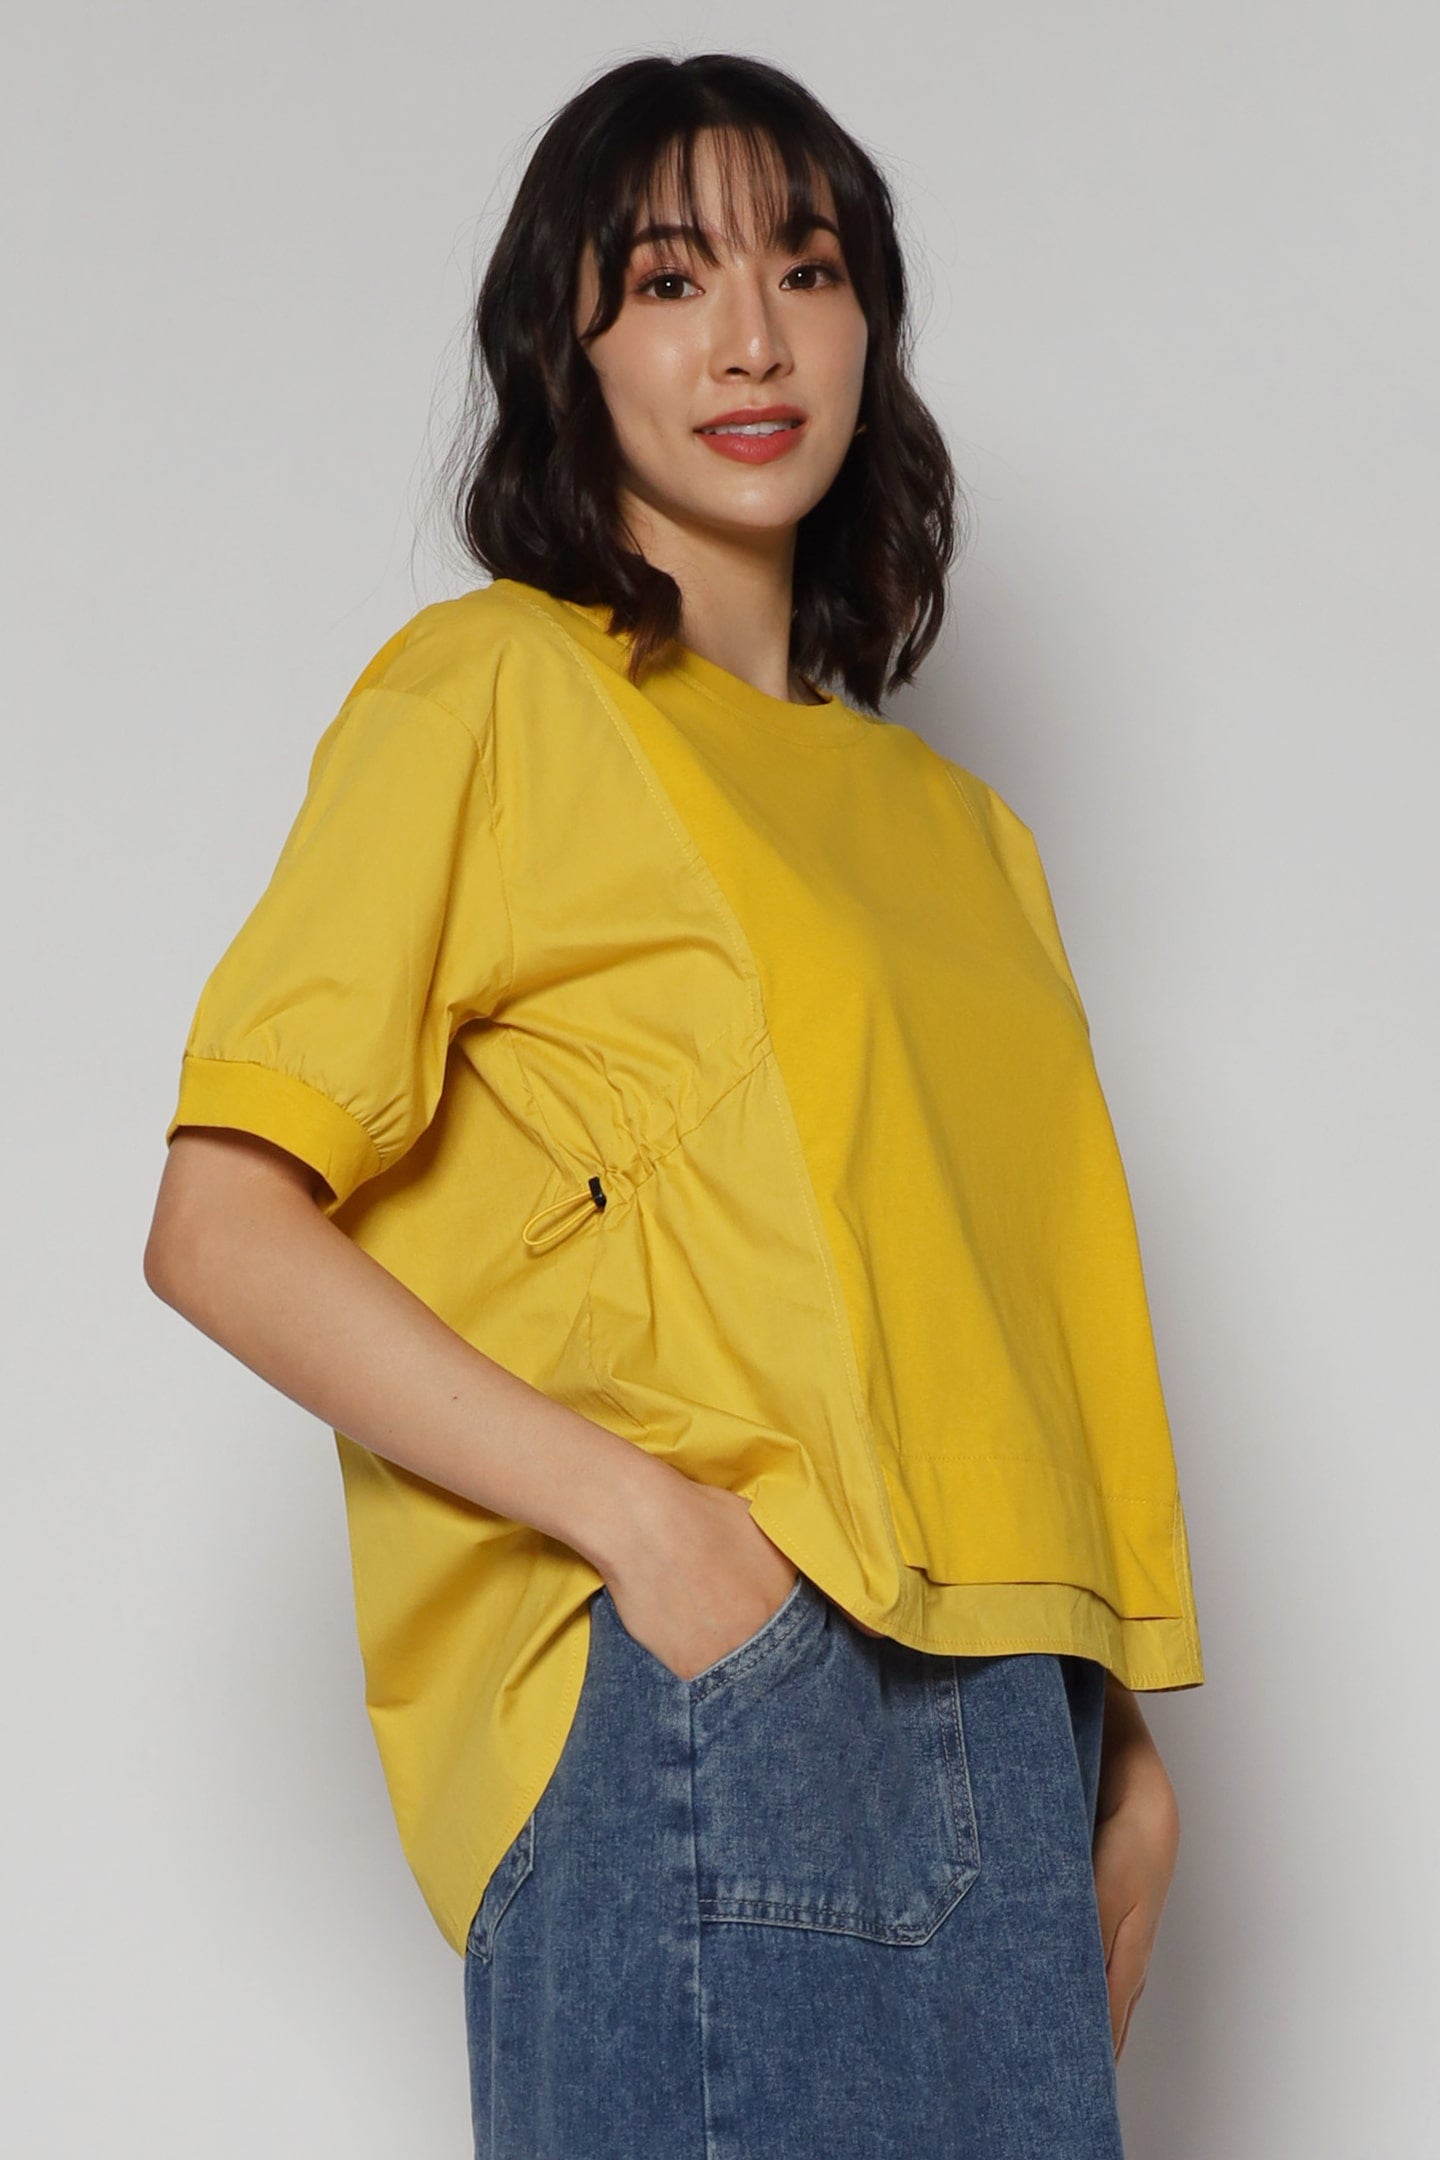 Zola Top in Yellow